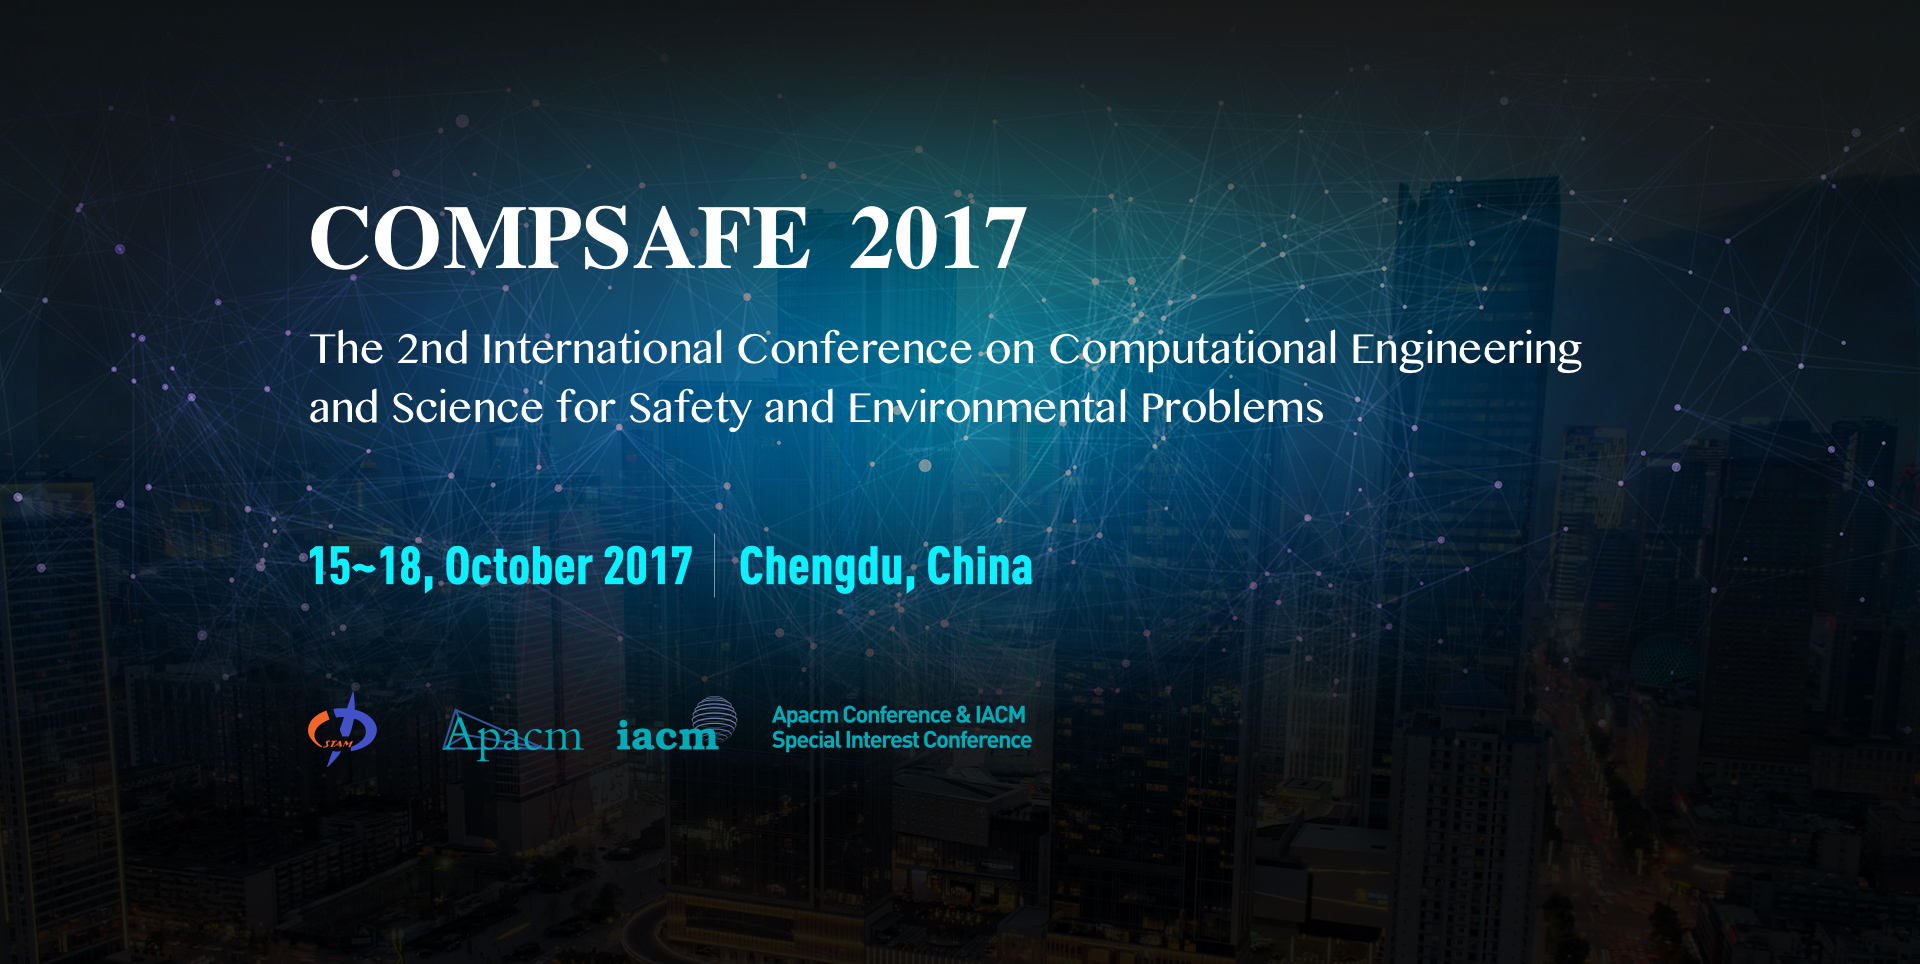 The 2nd International Conference on Computational Engineering and Science for Safety and Environmental Problems